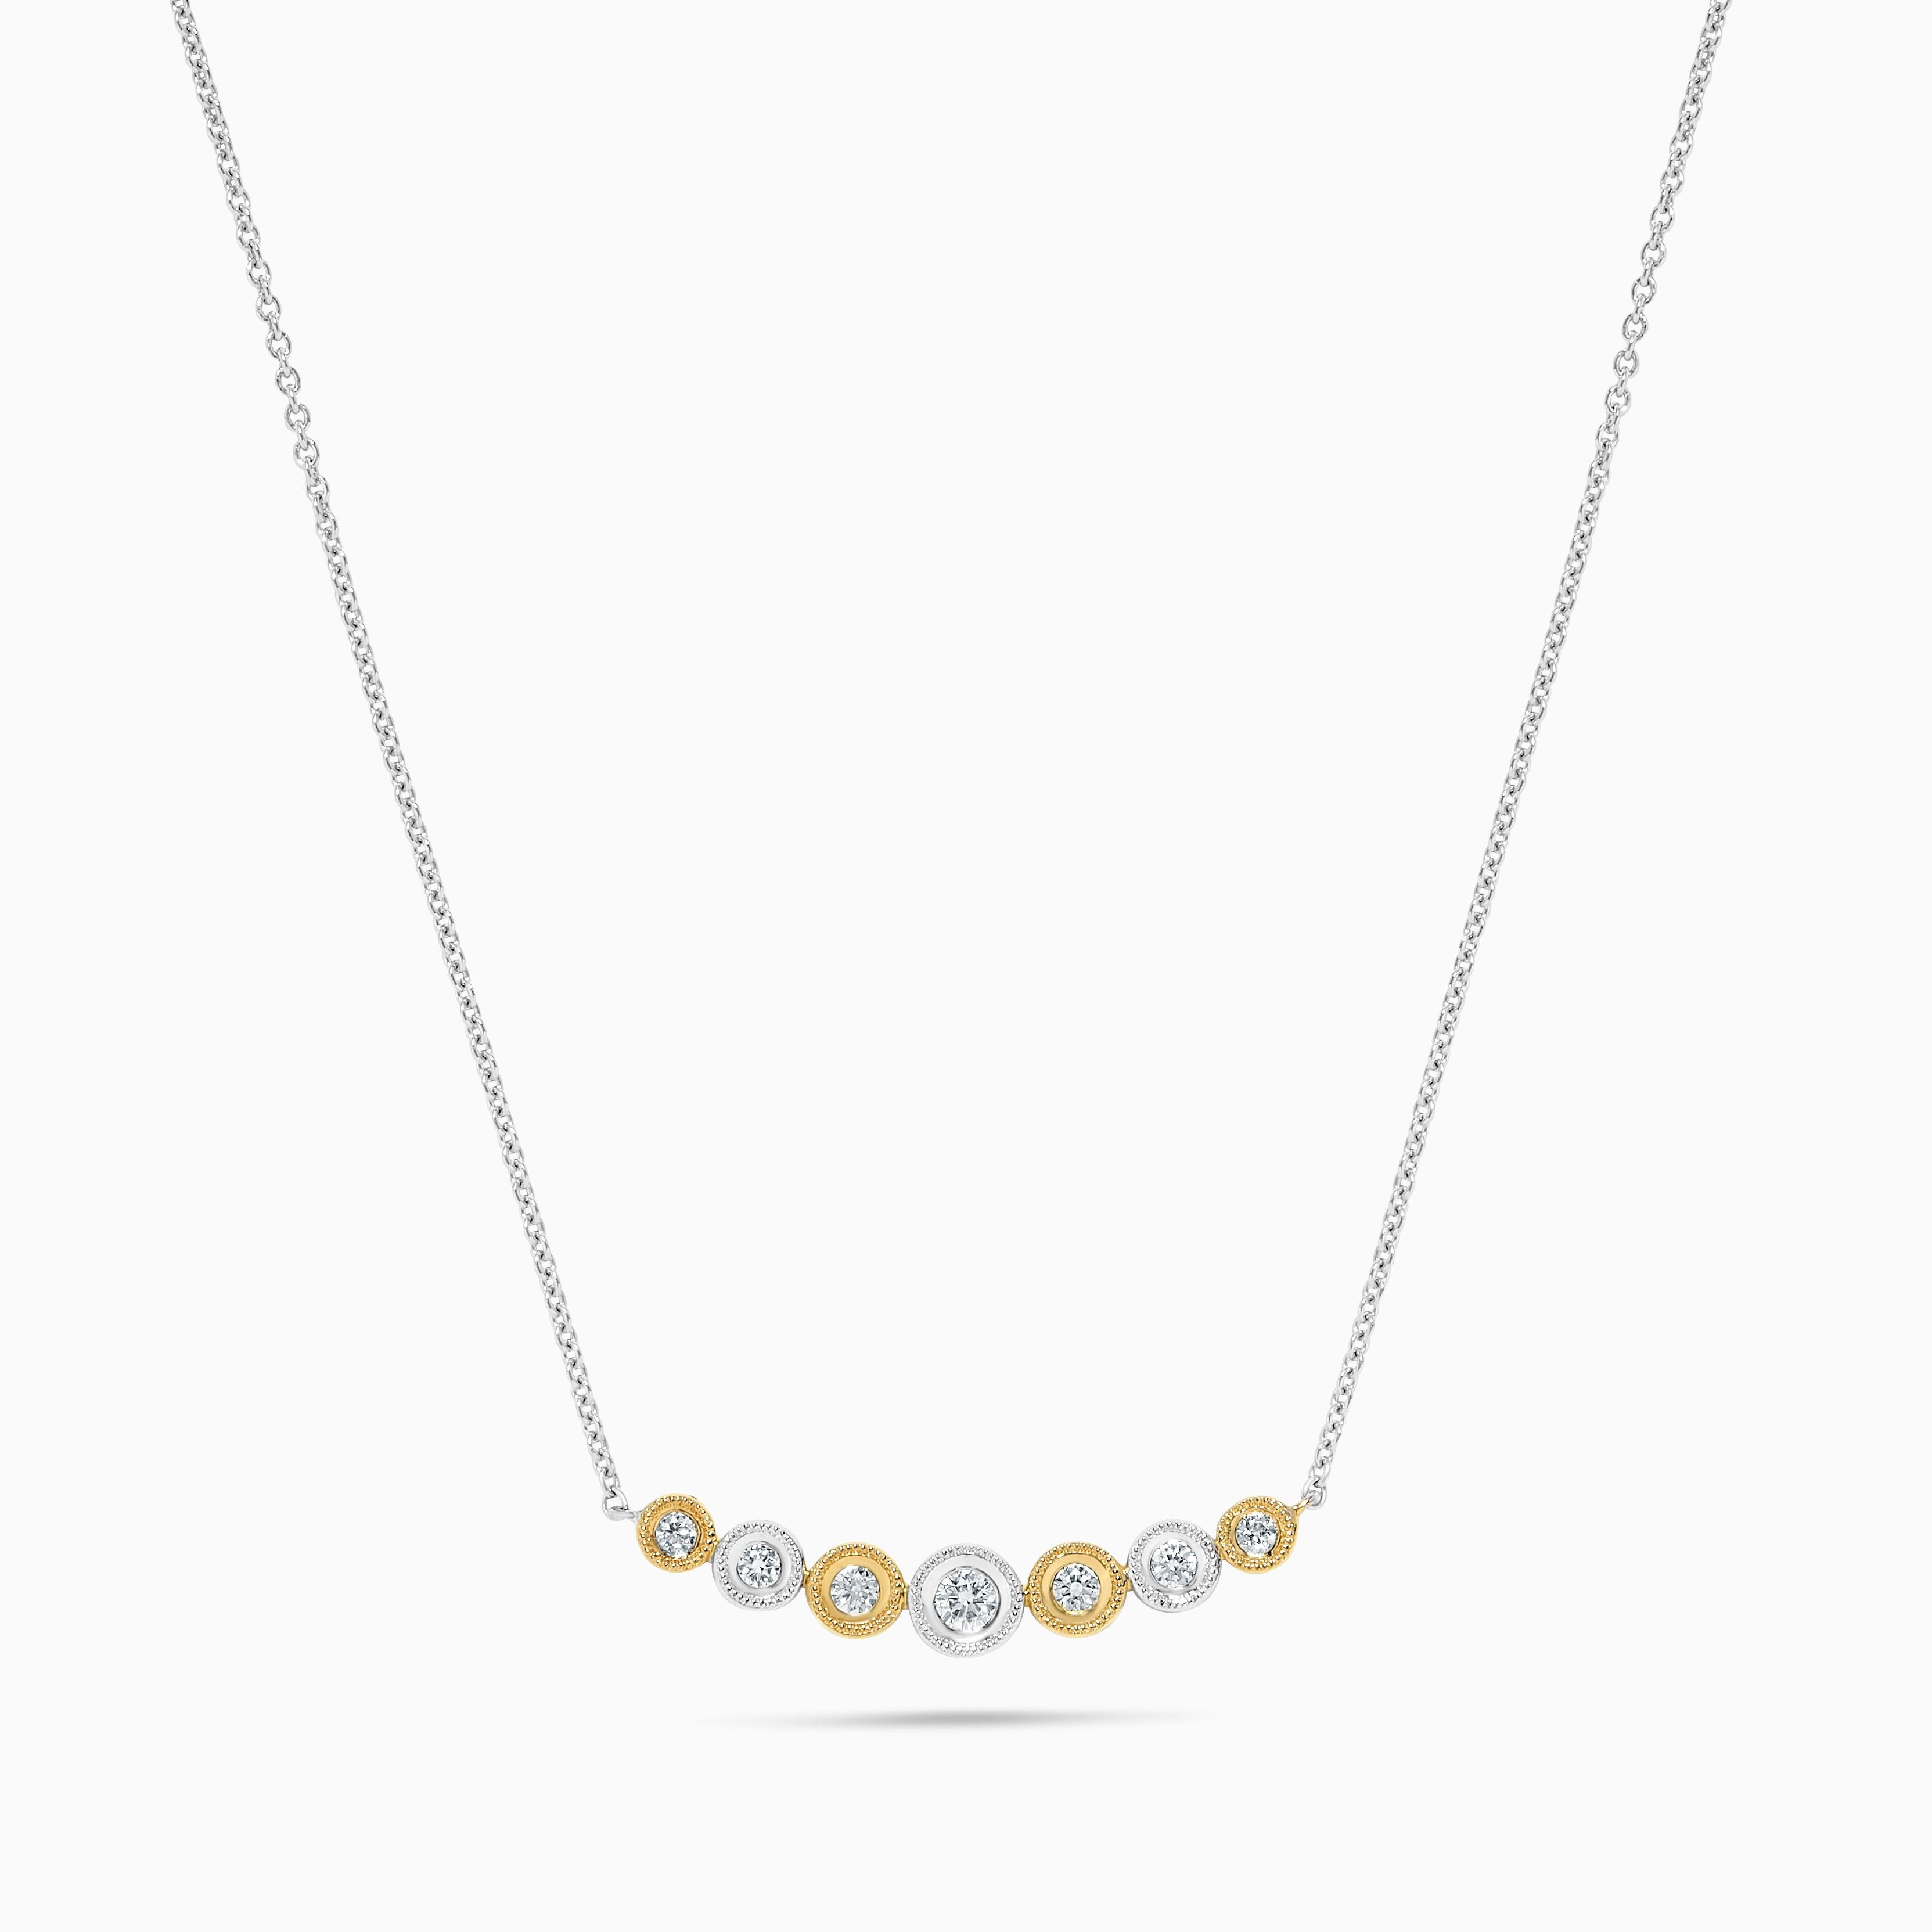 RareGemWorld's classic diamond necklace. Mounted in a beautiful 14K Yellow and White Gold setting with natural round yellow diamond melee complimented by natural round white diamond melee. This necklace is guaranteed to impress and enhance your